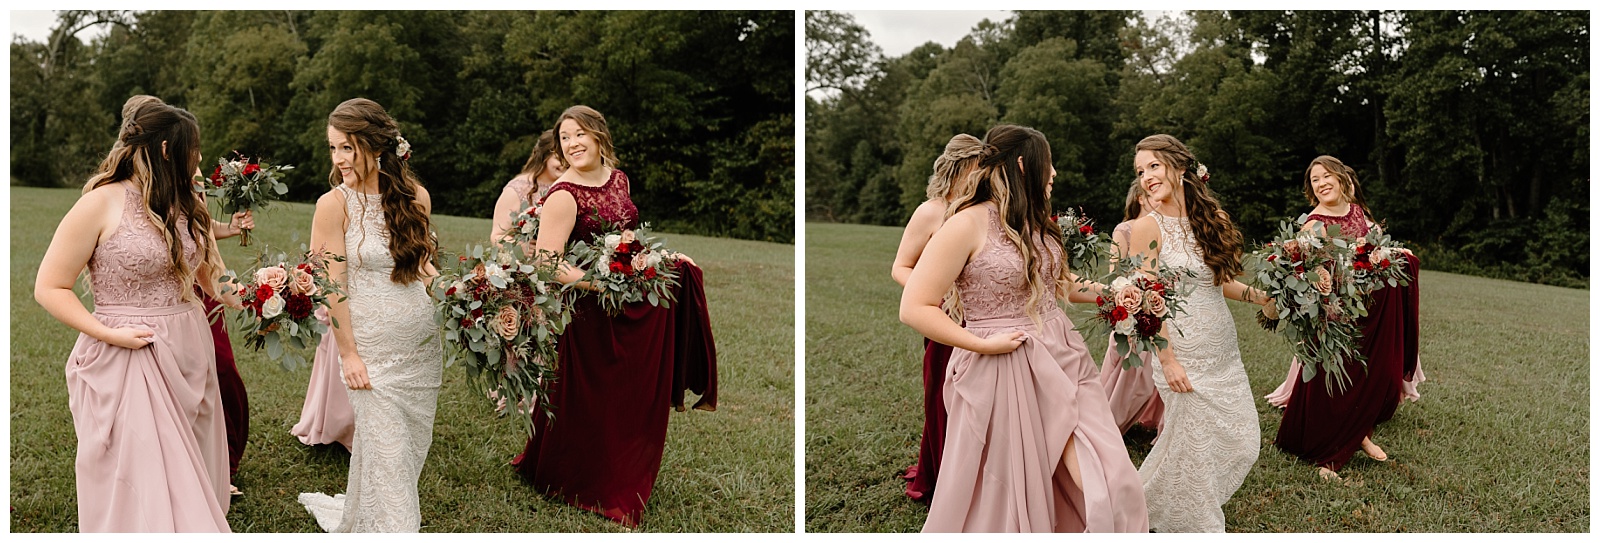 Bridesmaids and bride pick up the train of their floor length dresses and walk across a field laughing together